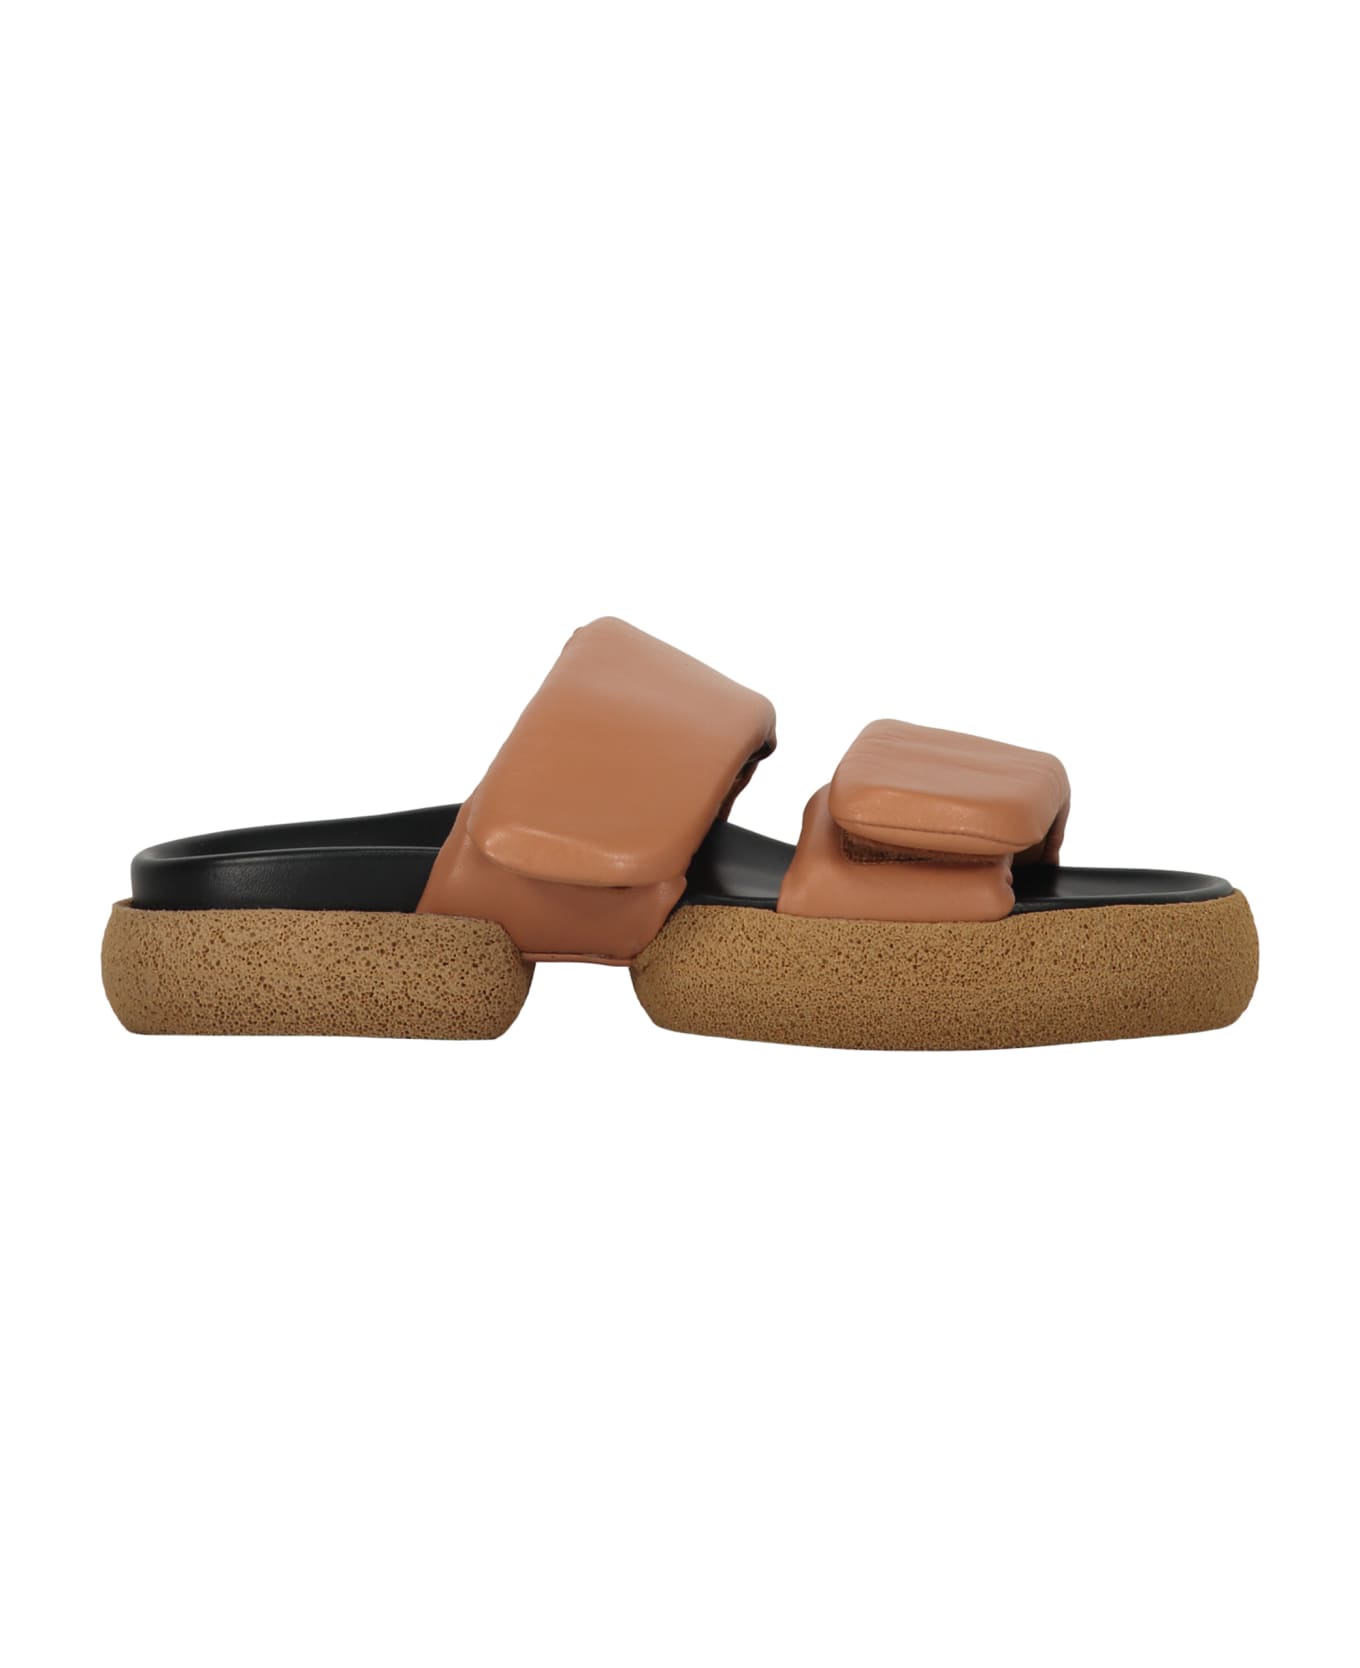 Dries Van Noten Leather And Rubber Slides - Beige その他各種シューズ